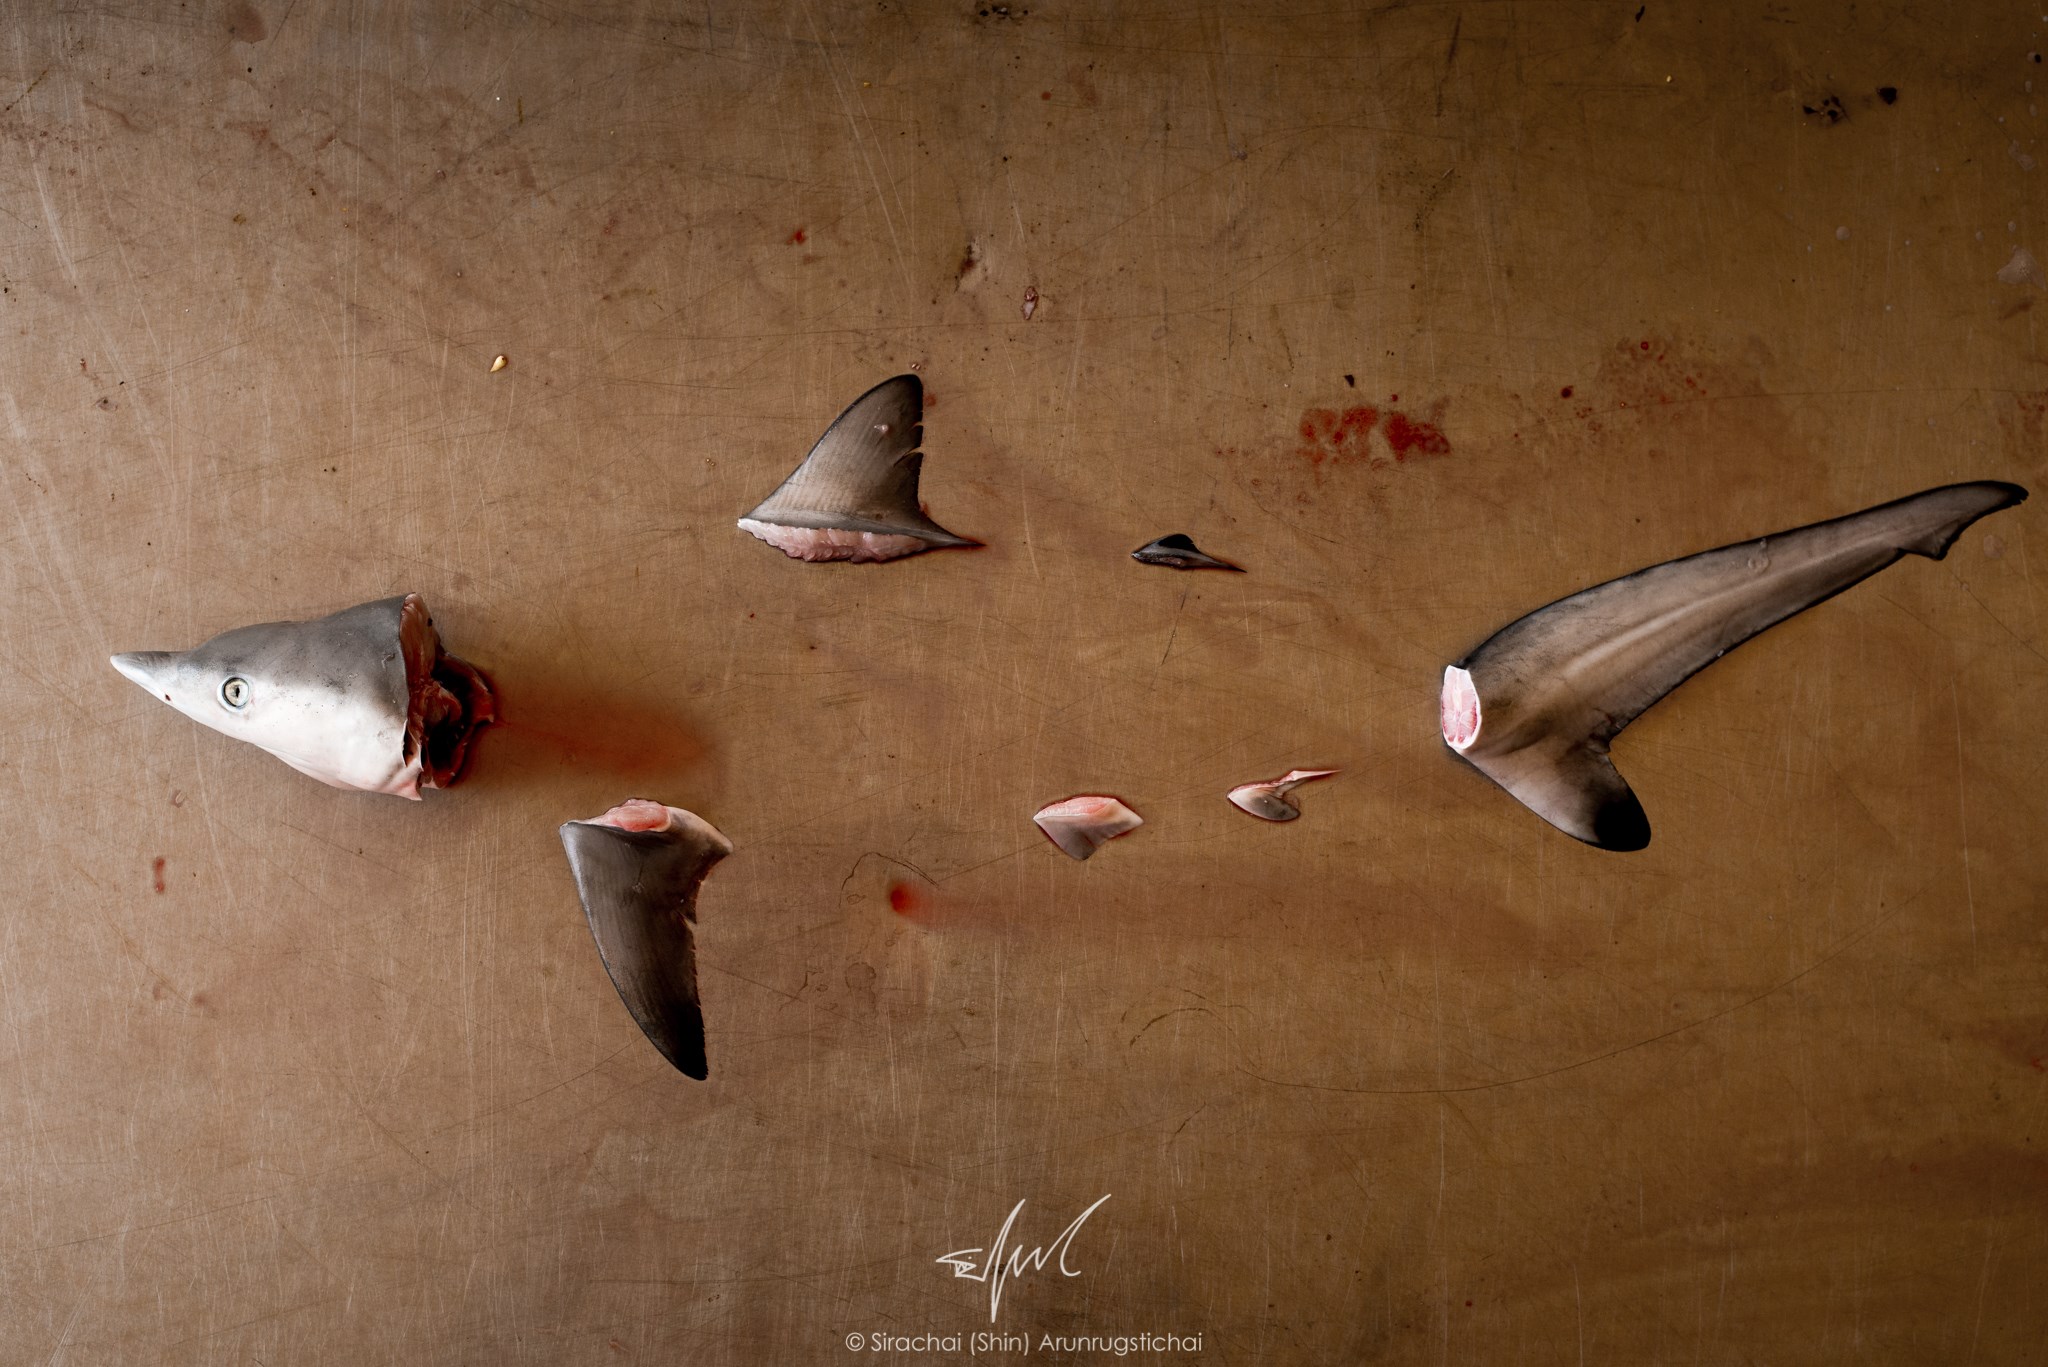 Parts of a Spottail shark arranged to symbolize disappearing shark numbers in Ranong, taken in April 2018. Photo: Sirachai Arunrugstichai / Courtesy